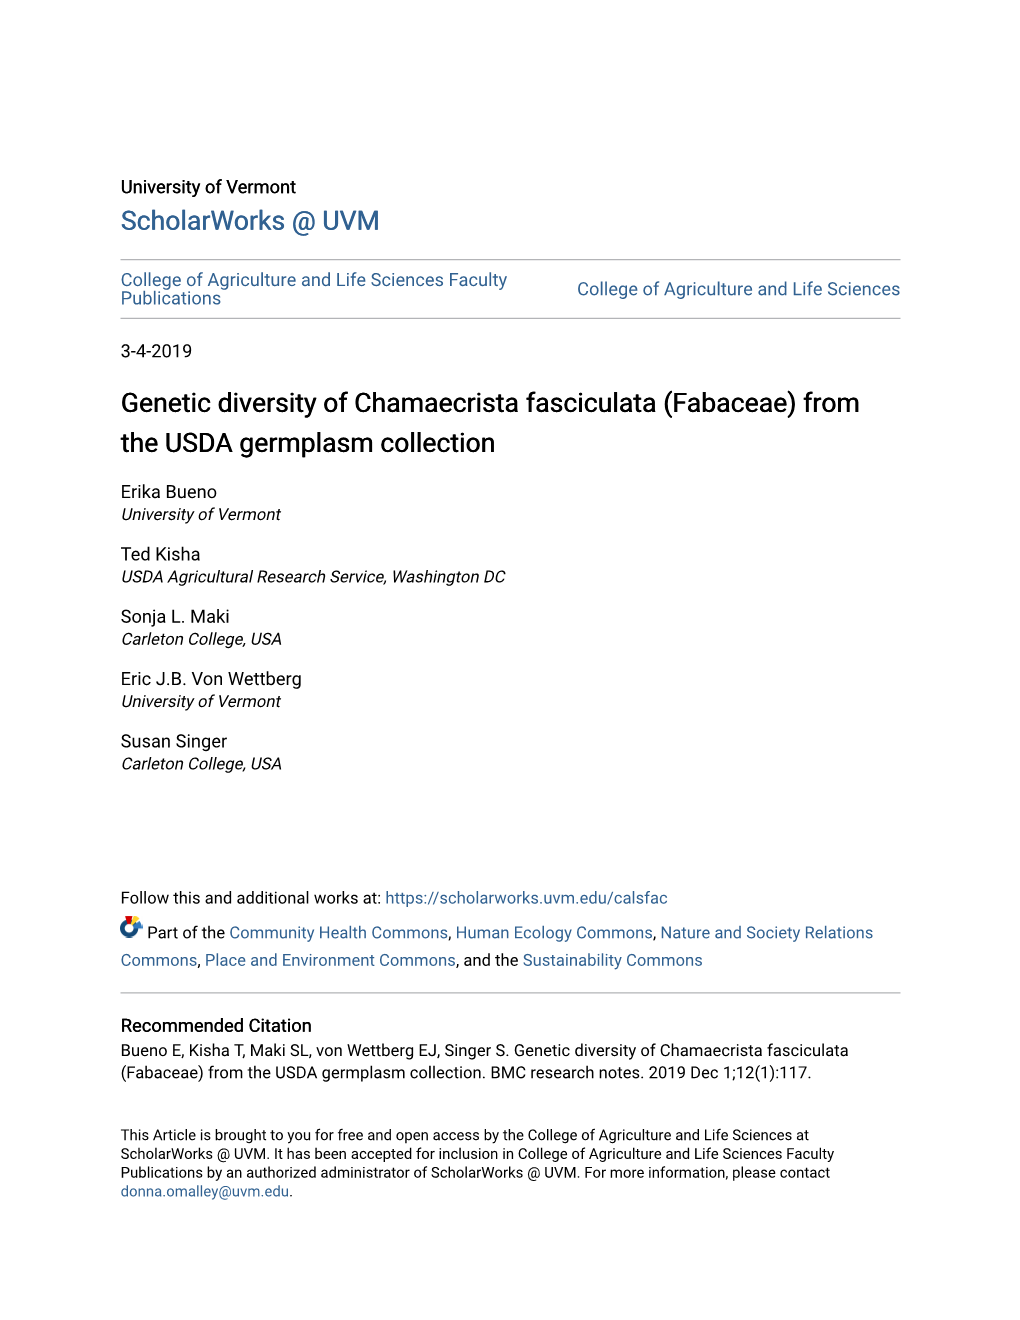 Genetic Diversity of Chamaecrista Fasciculata (Fabaceae) from the USDA Germplasm Collection